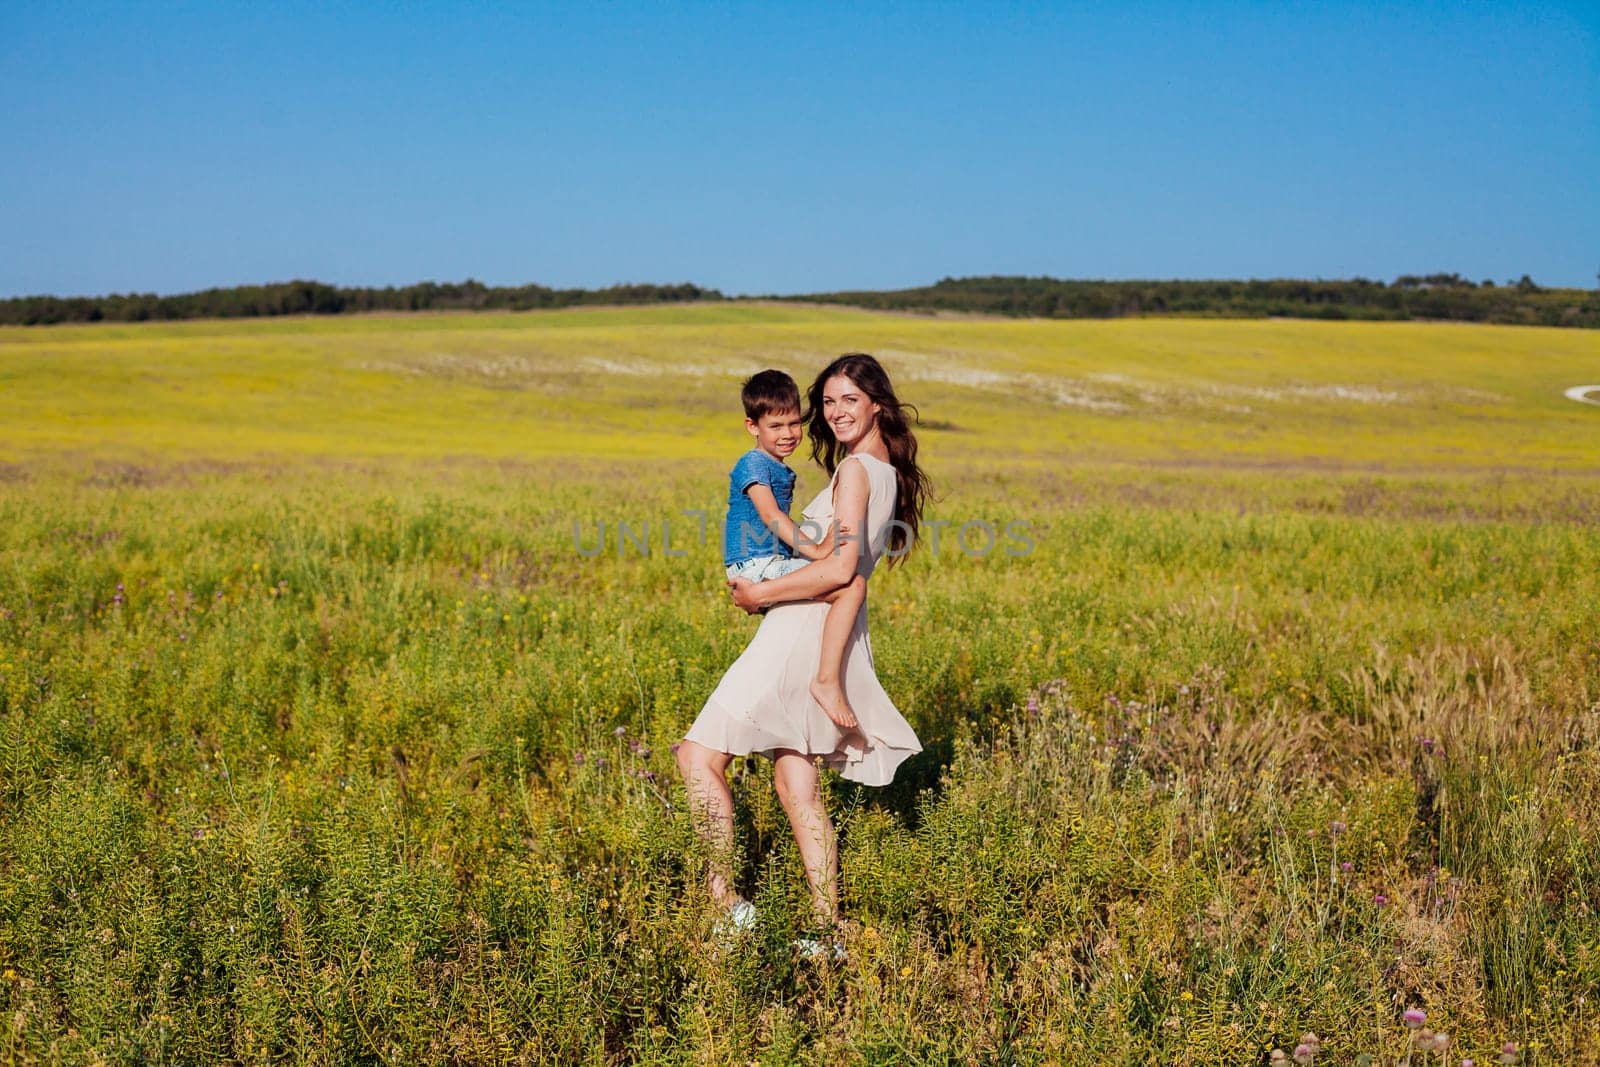 Mom and son in a field with flowers on a walk journey by Simakov